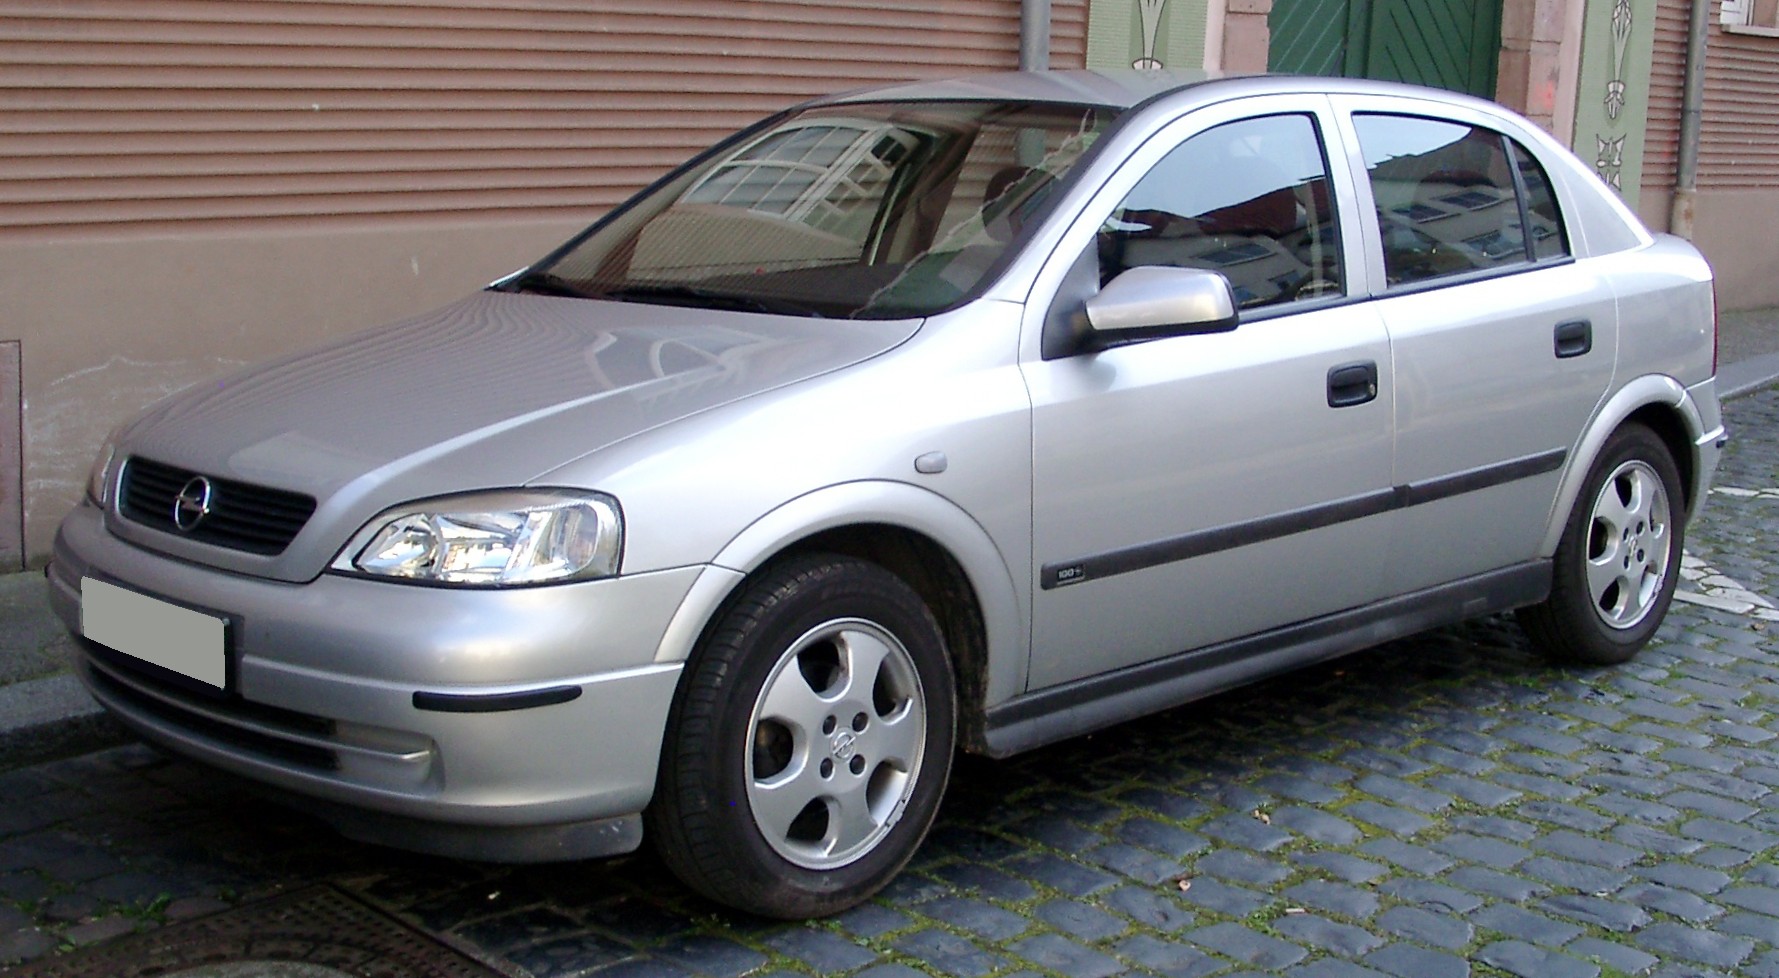 File:Opel Astra G front 20080424.jpg - Wikimedia Commons